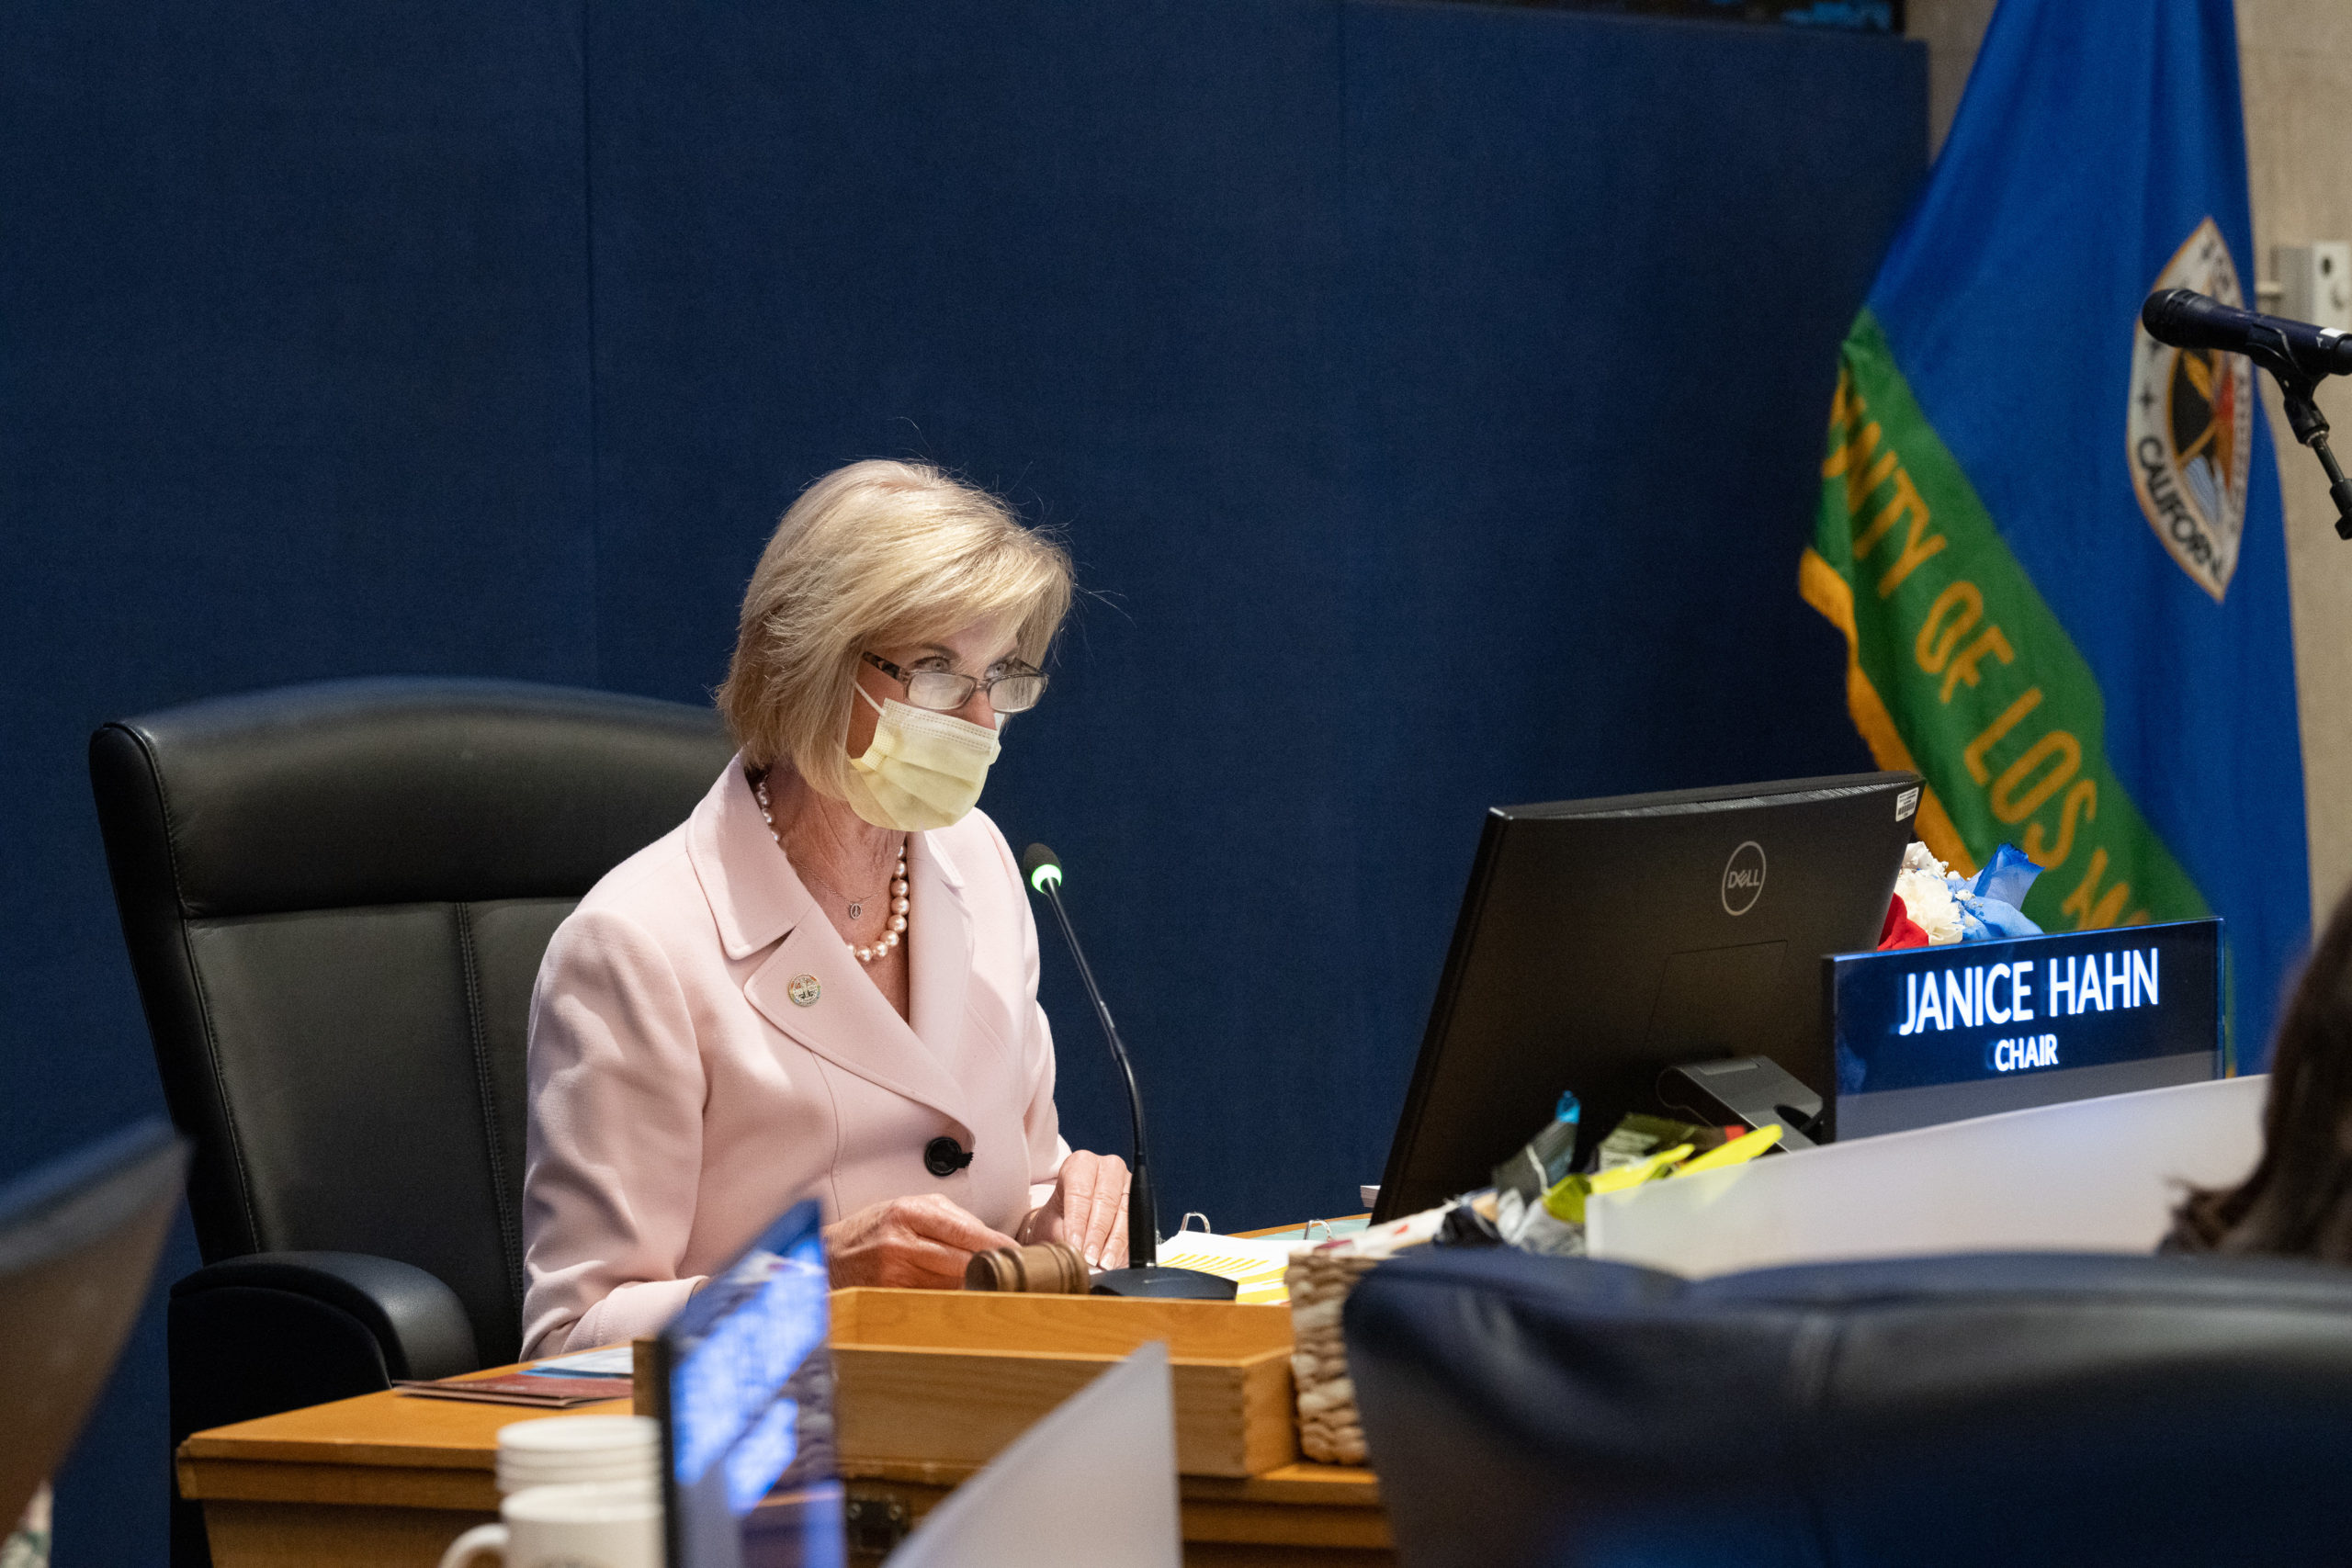 Supervisor Janice Hahn Brings Increased Public Participation to Board as Chair